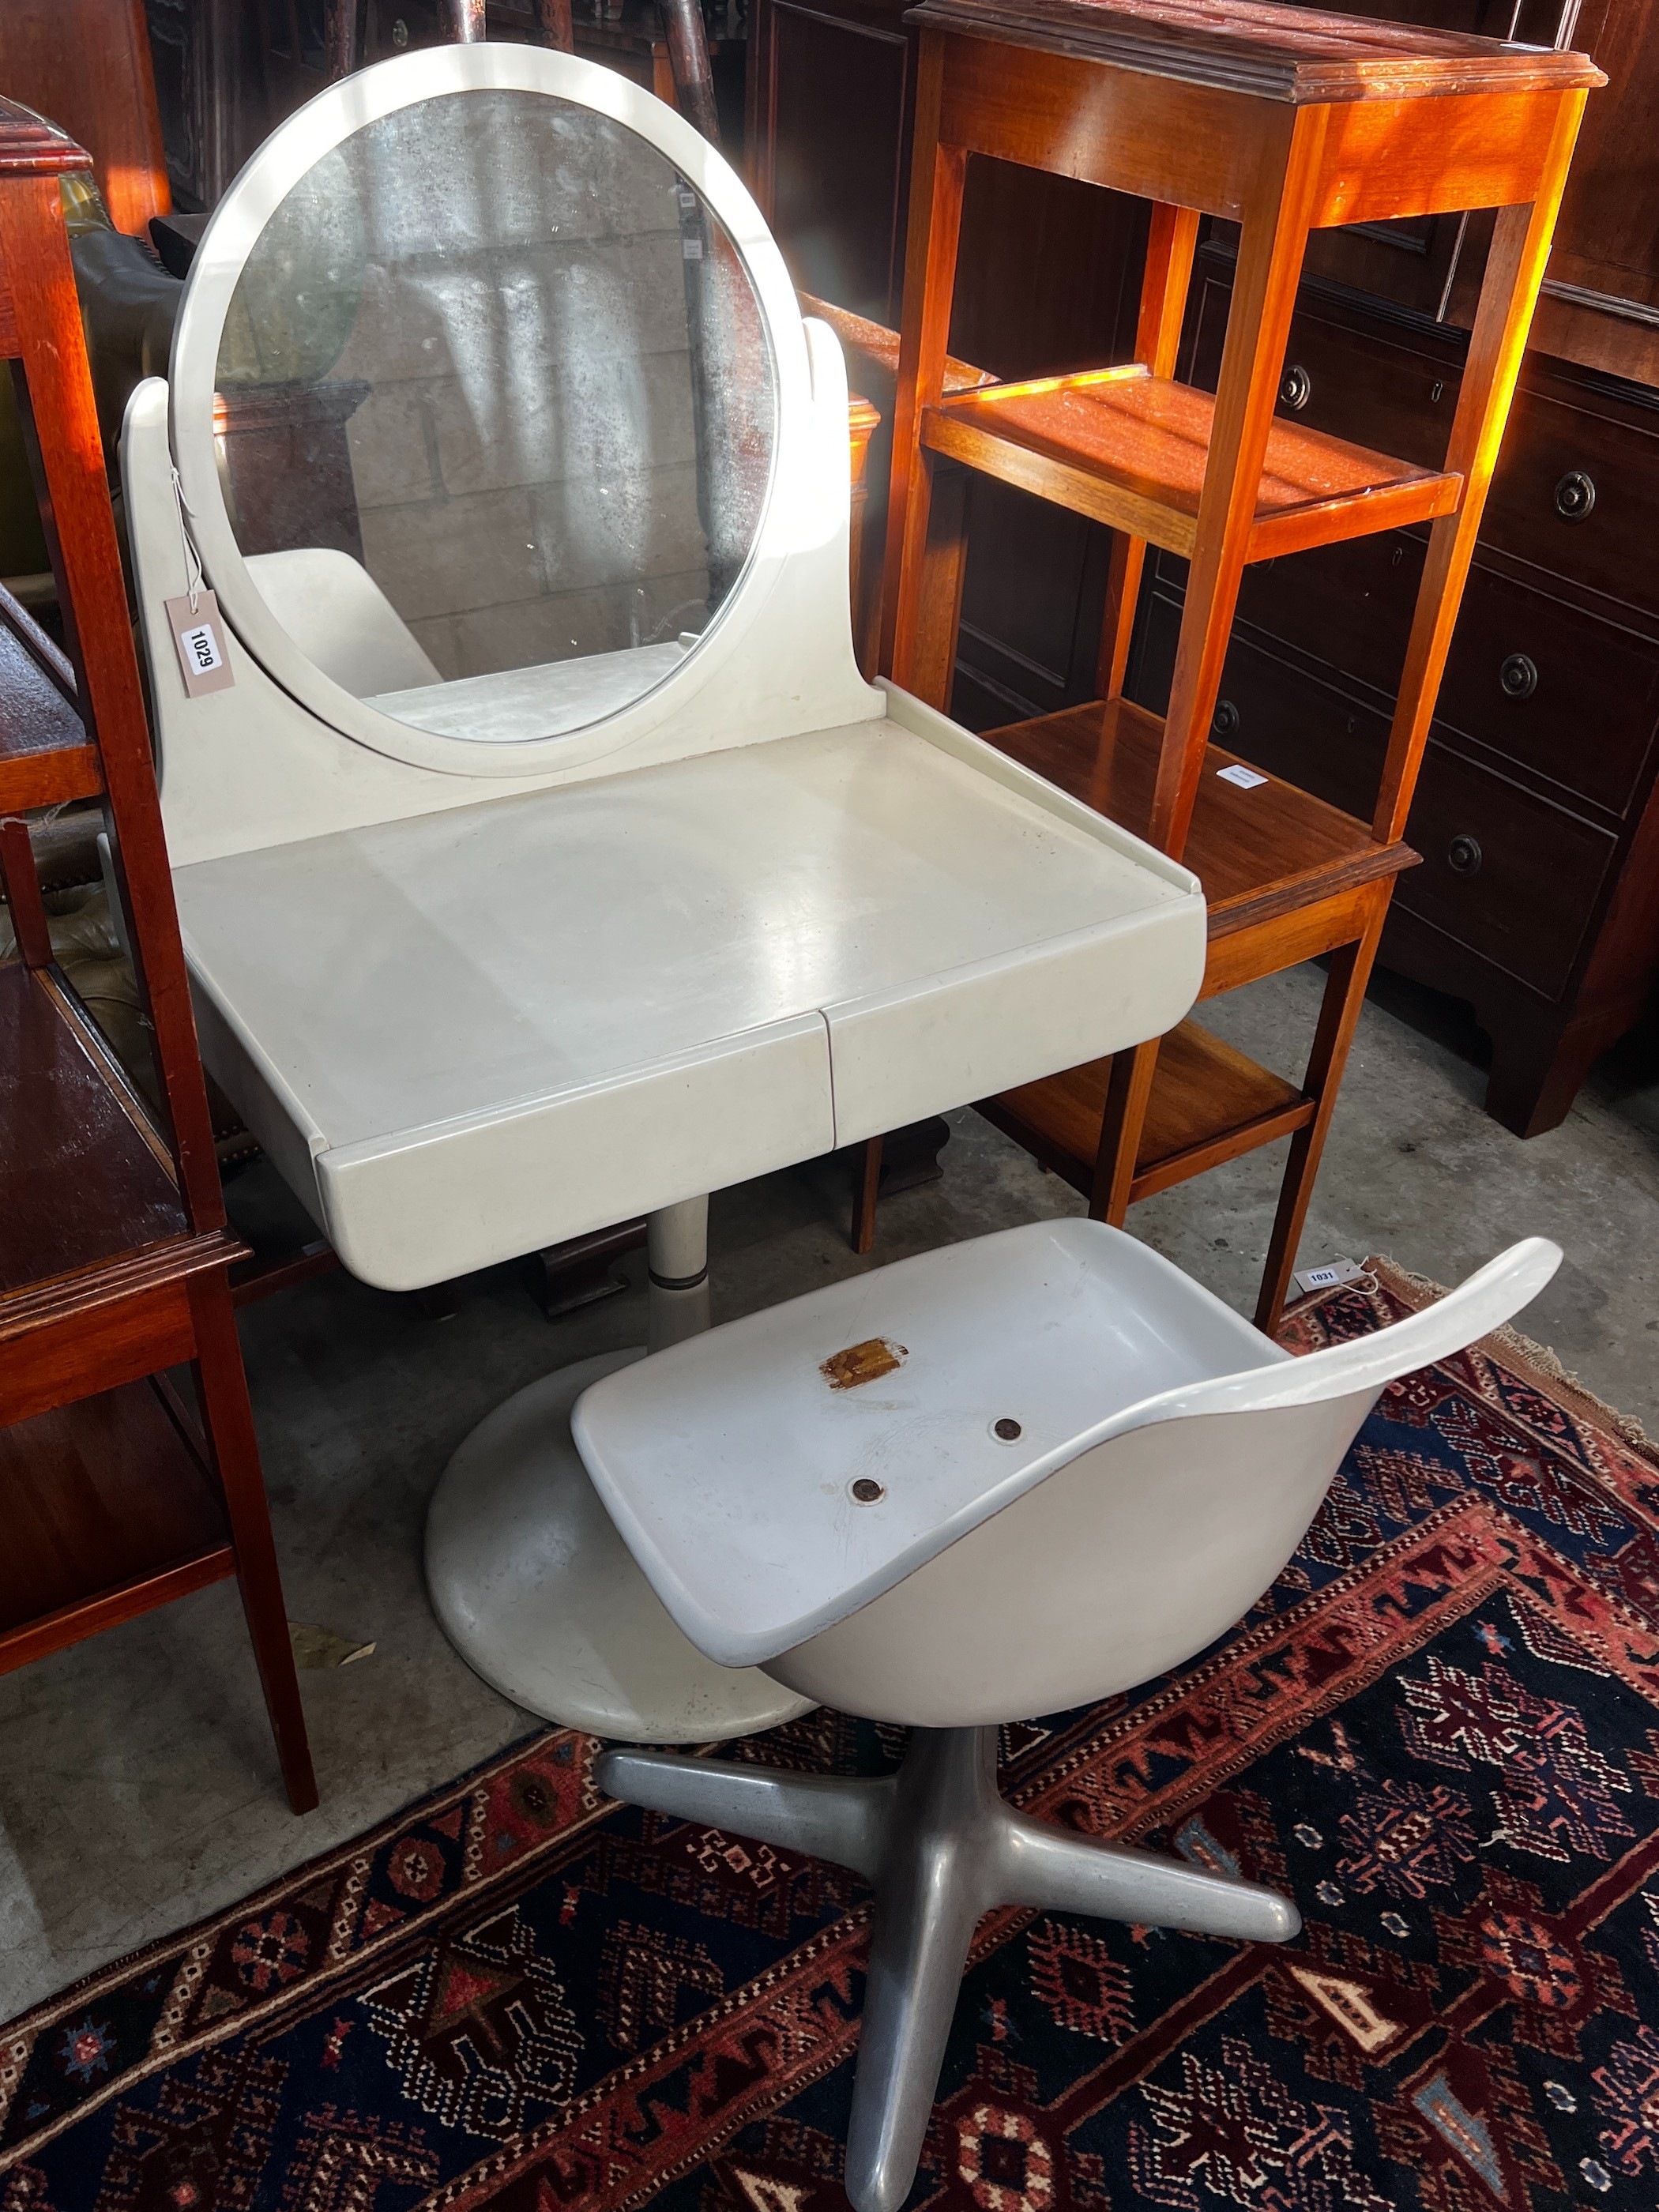 An Arkana dressing table, width 70cm, depth 46cm, height 118cm together with a chair